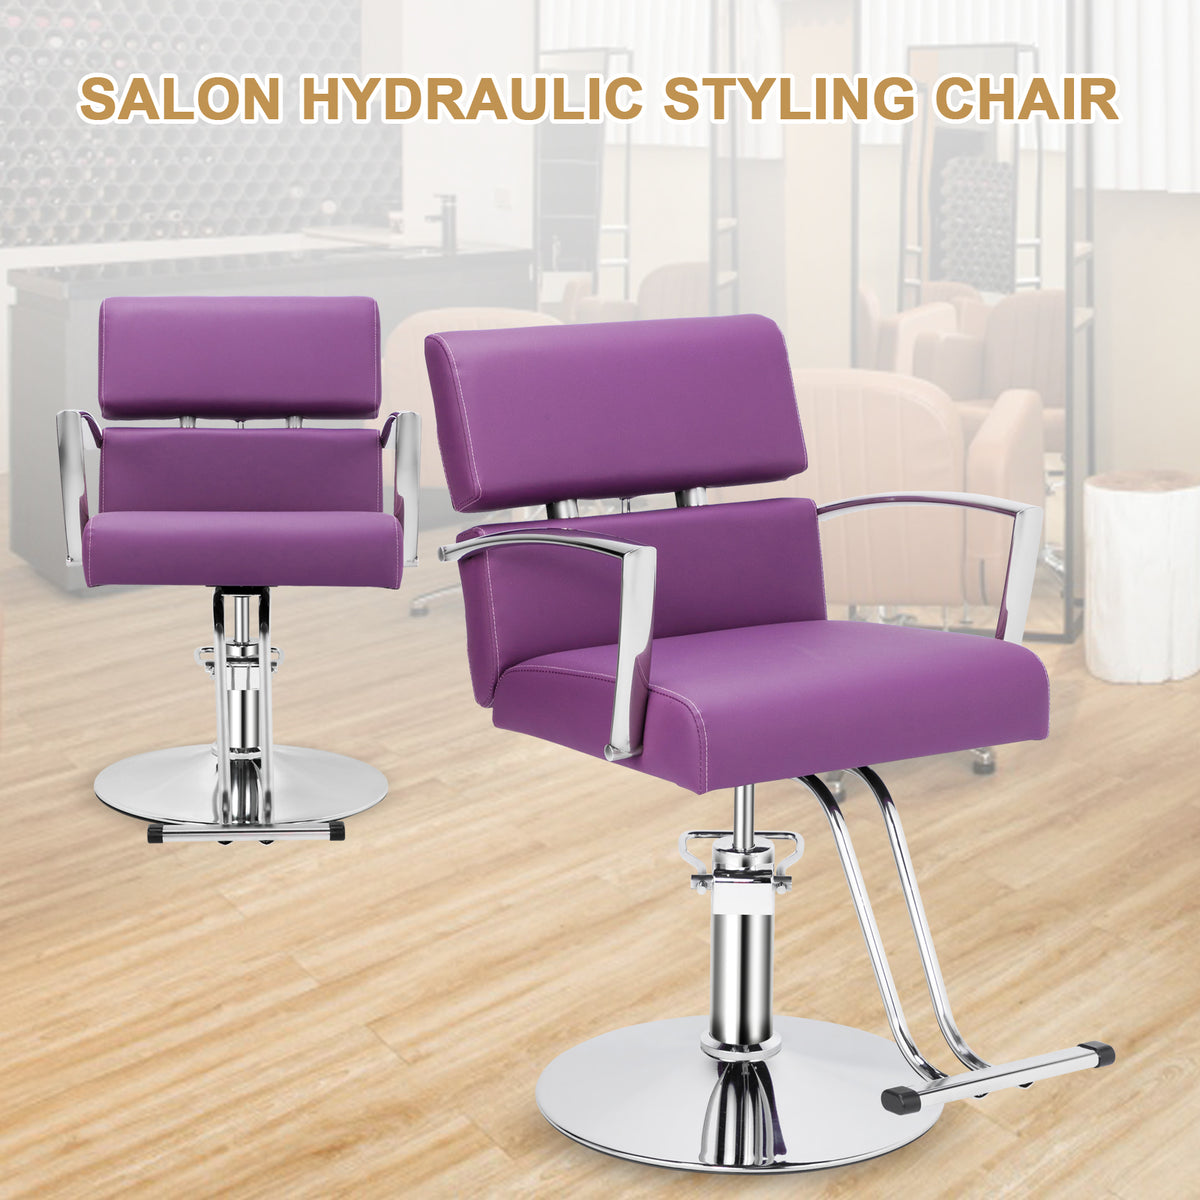 OmySalon Beauty Barber Chair Salon Hydraulic Styling Chair with 360 Degree Swivel